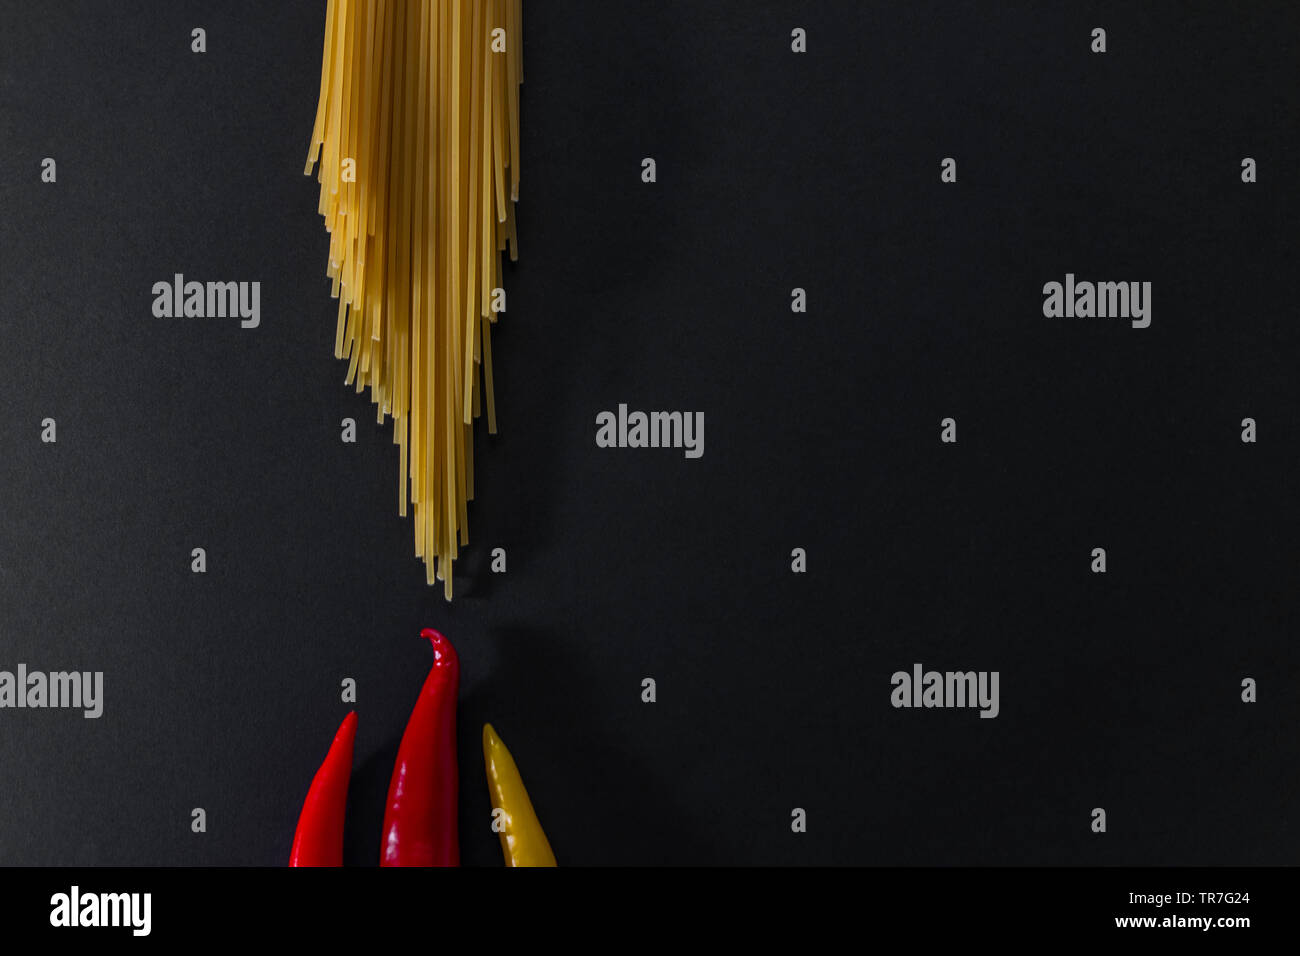 Raw spaghetti and fresh orange red yellow peppers on black surface. Flat lay view. Copy space. Cooking concept. Stock Photo